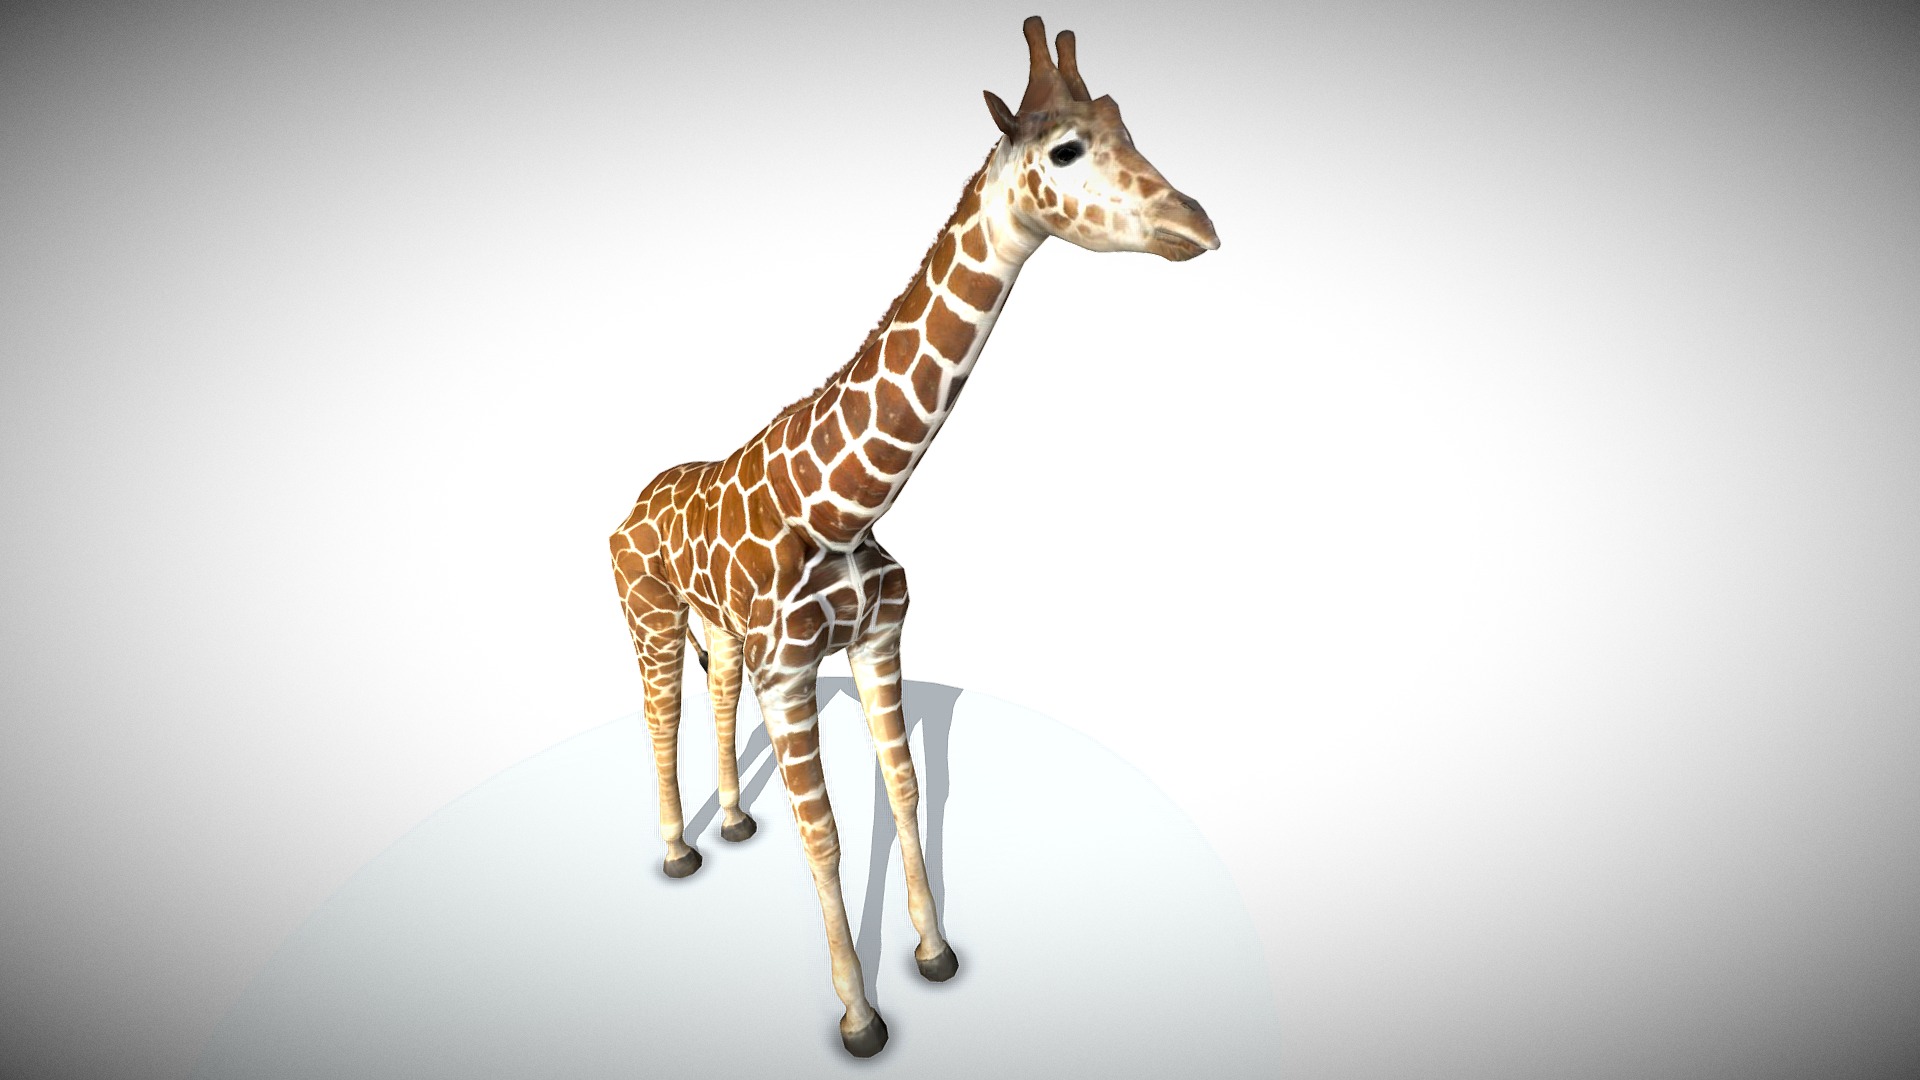 3D model Giraffe - This is a 3D model of the Giraffe. The 3D model is about a giraffe standing on a white surface.